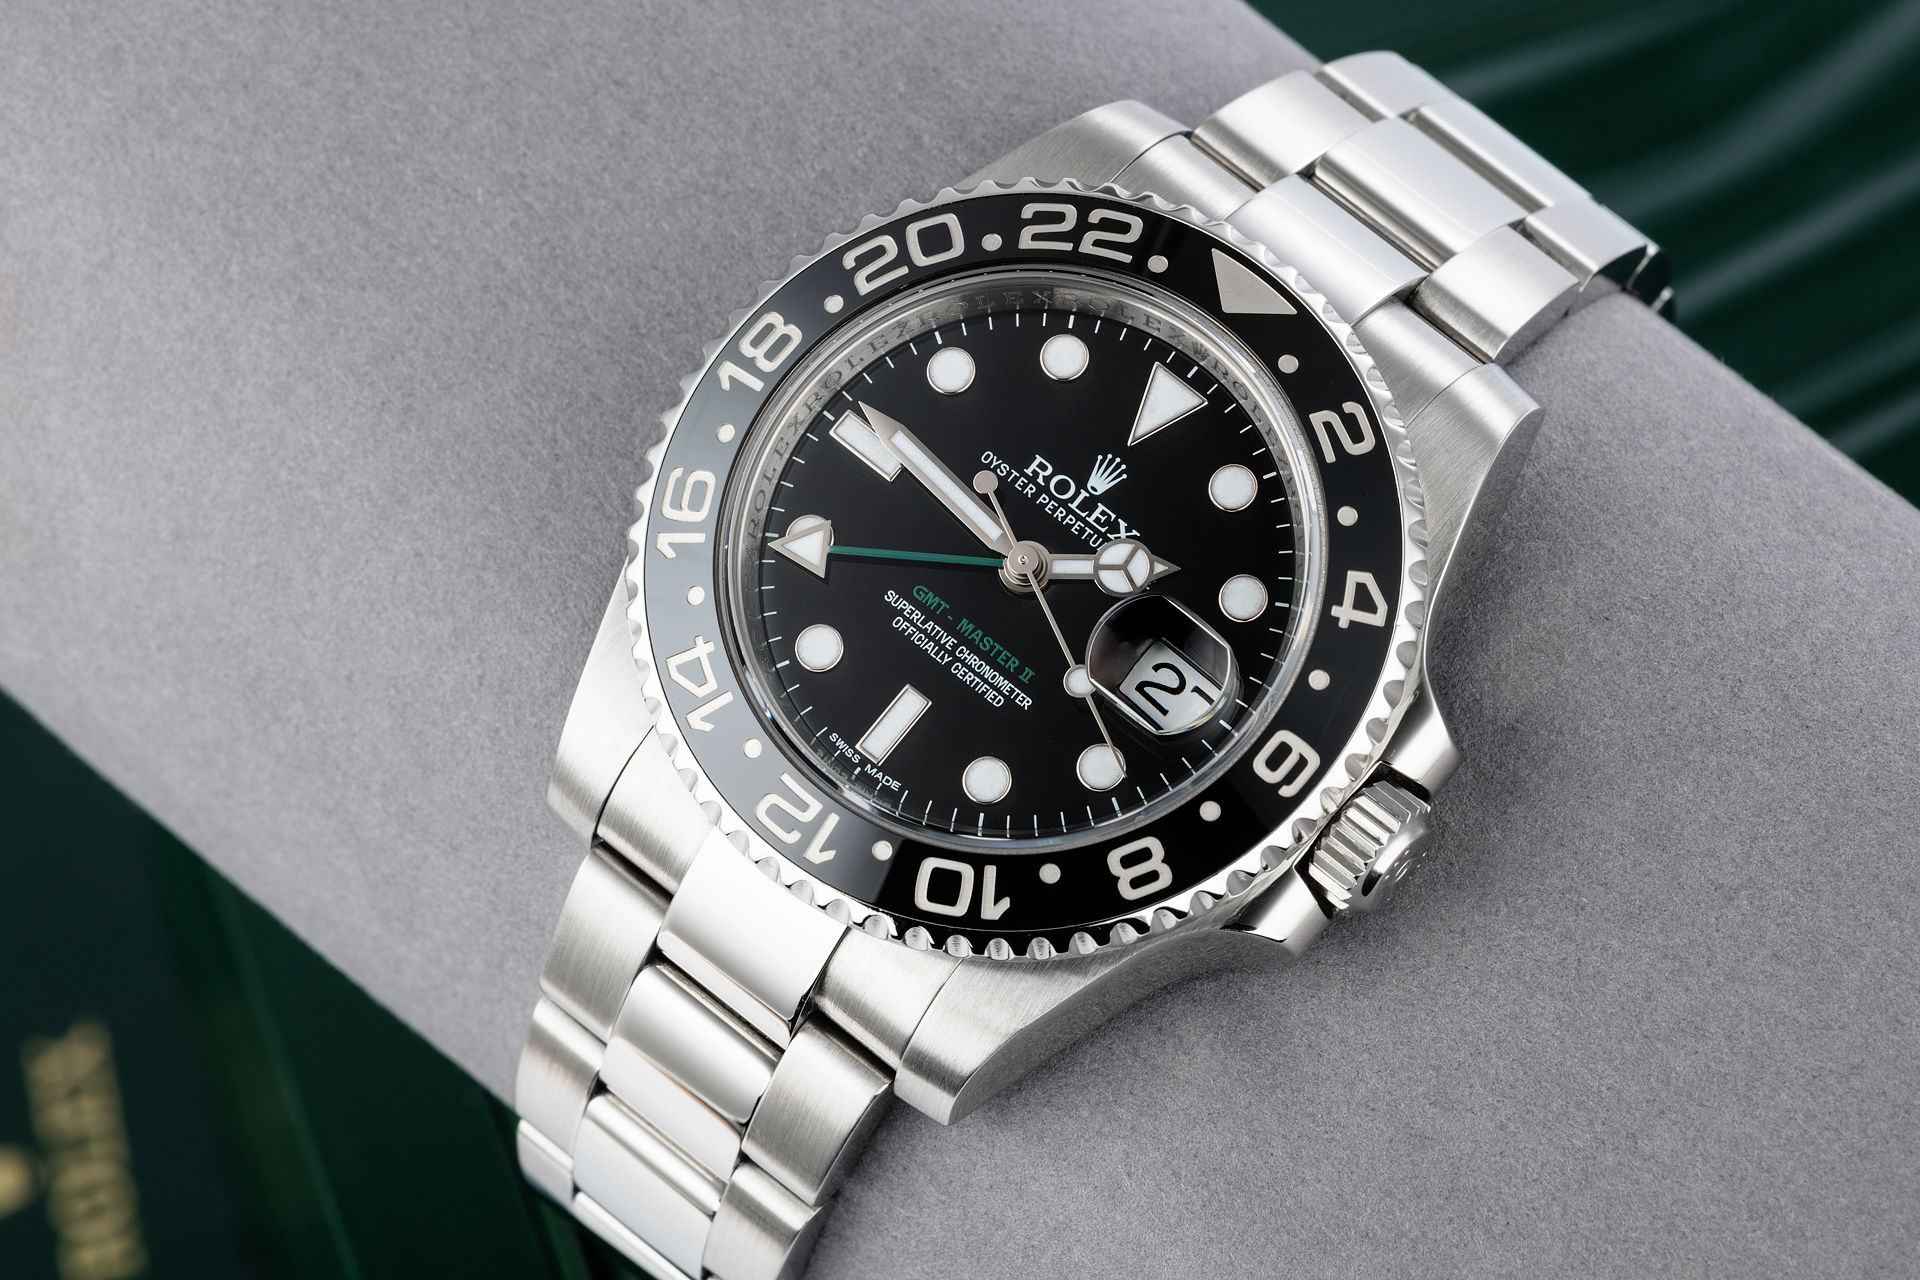 ref 116710LN | Limited Edition 'Sea King' | Rolex GMT-Master II